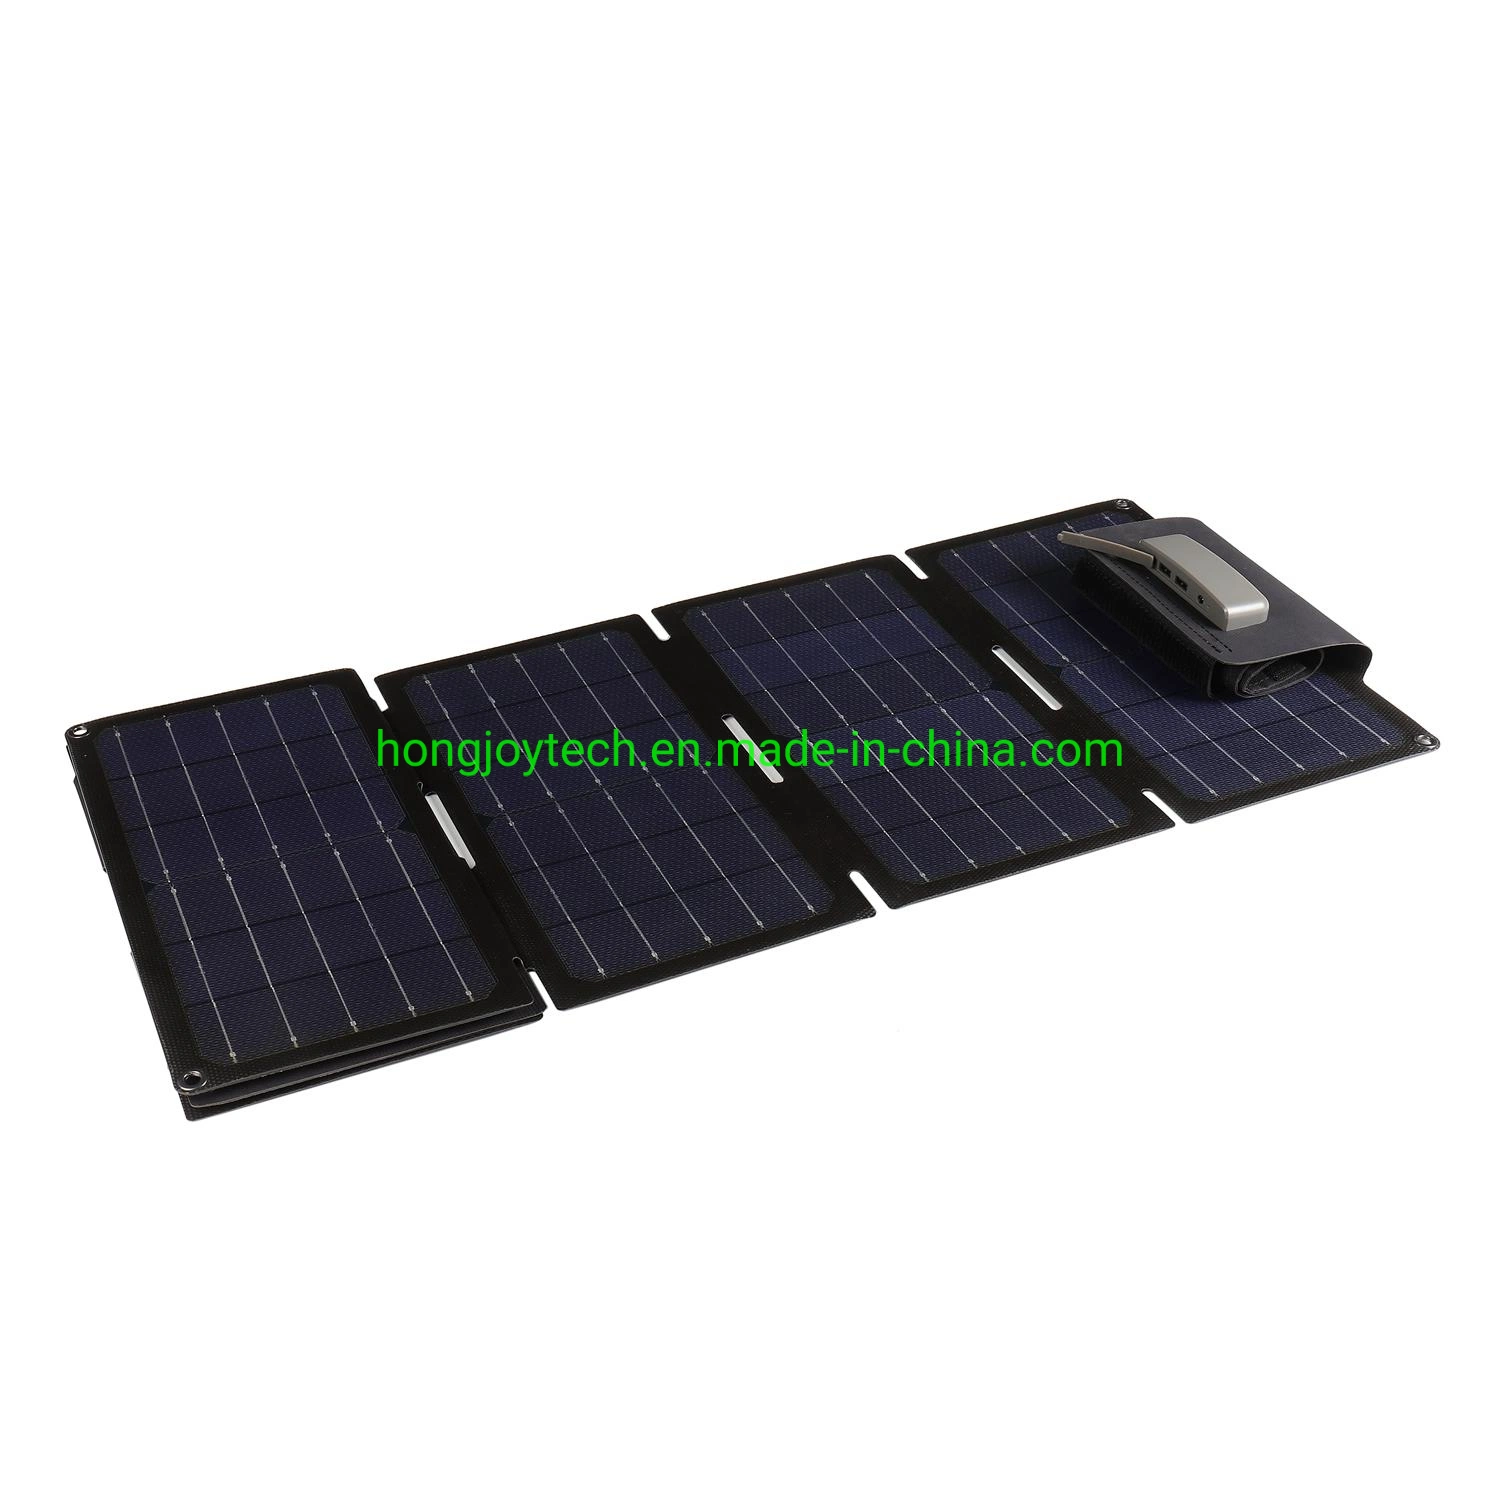 Flexible Green Energy Powered Charger Carrying Holder Bag 21W 28W 40W 60W 90W 100W 105W 120W Portable Photovoltaic Silicon Cell PV Module Foldable Solar Panel